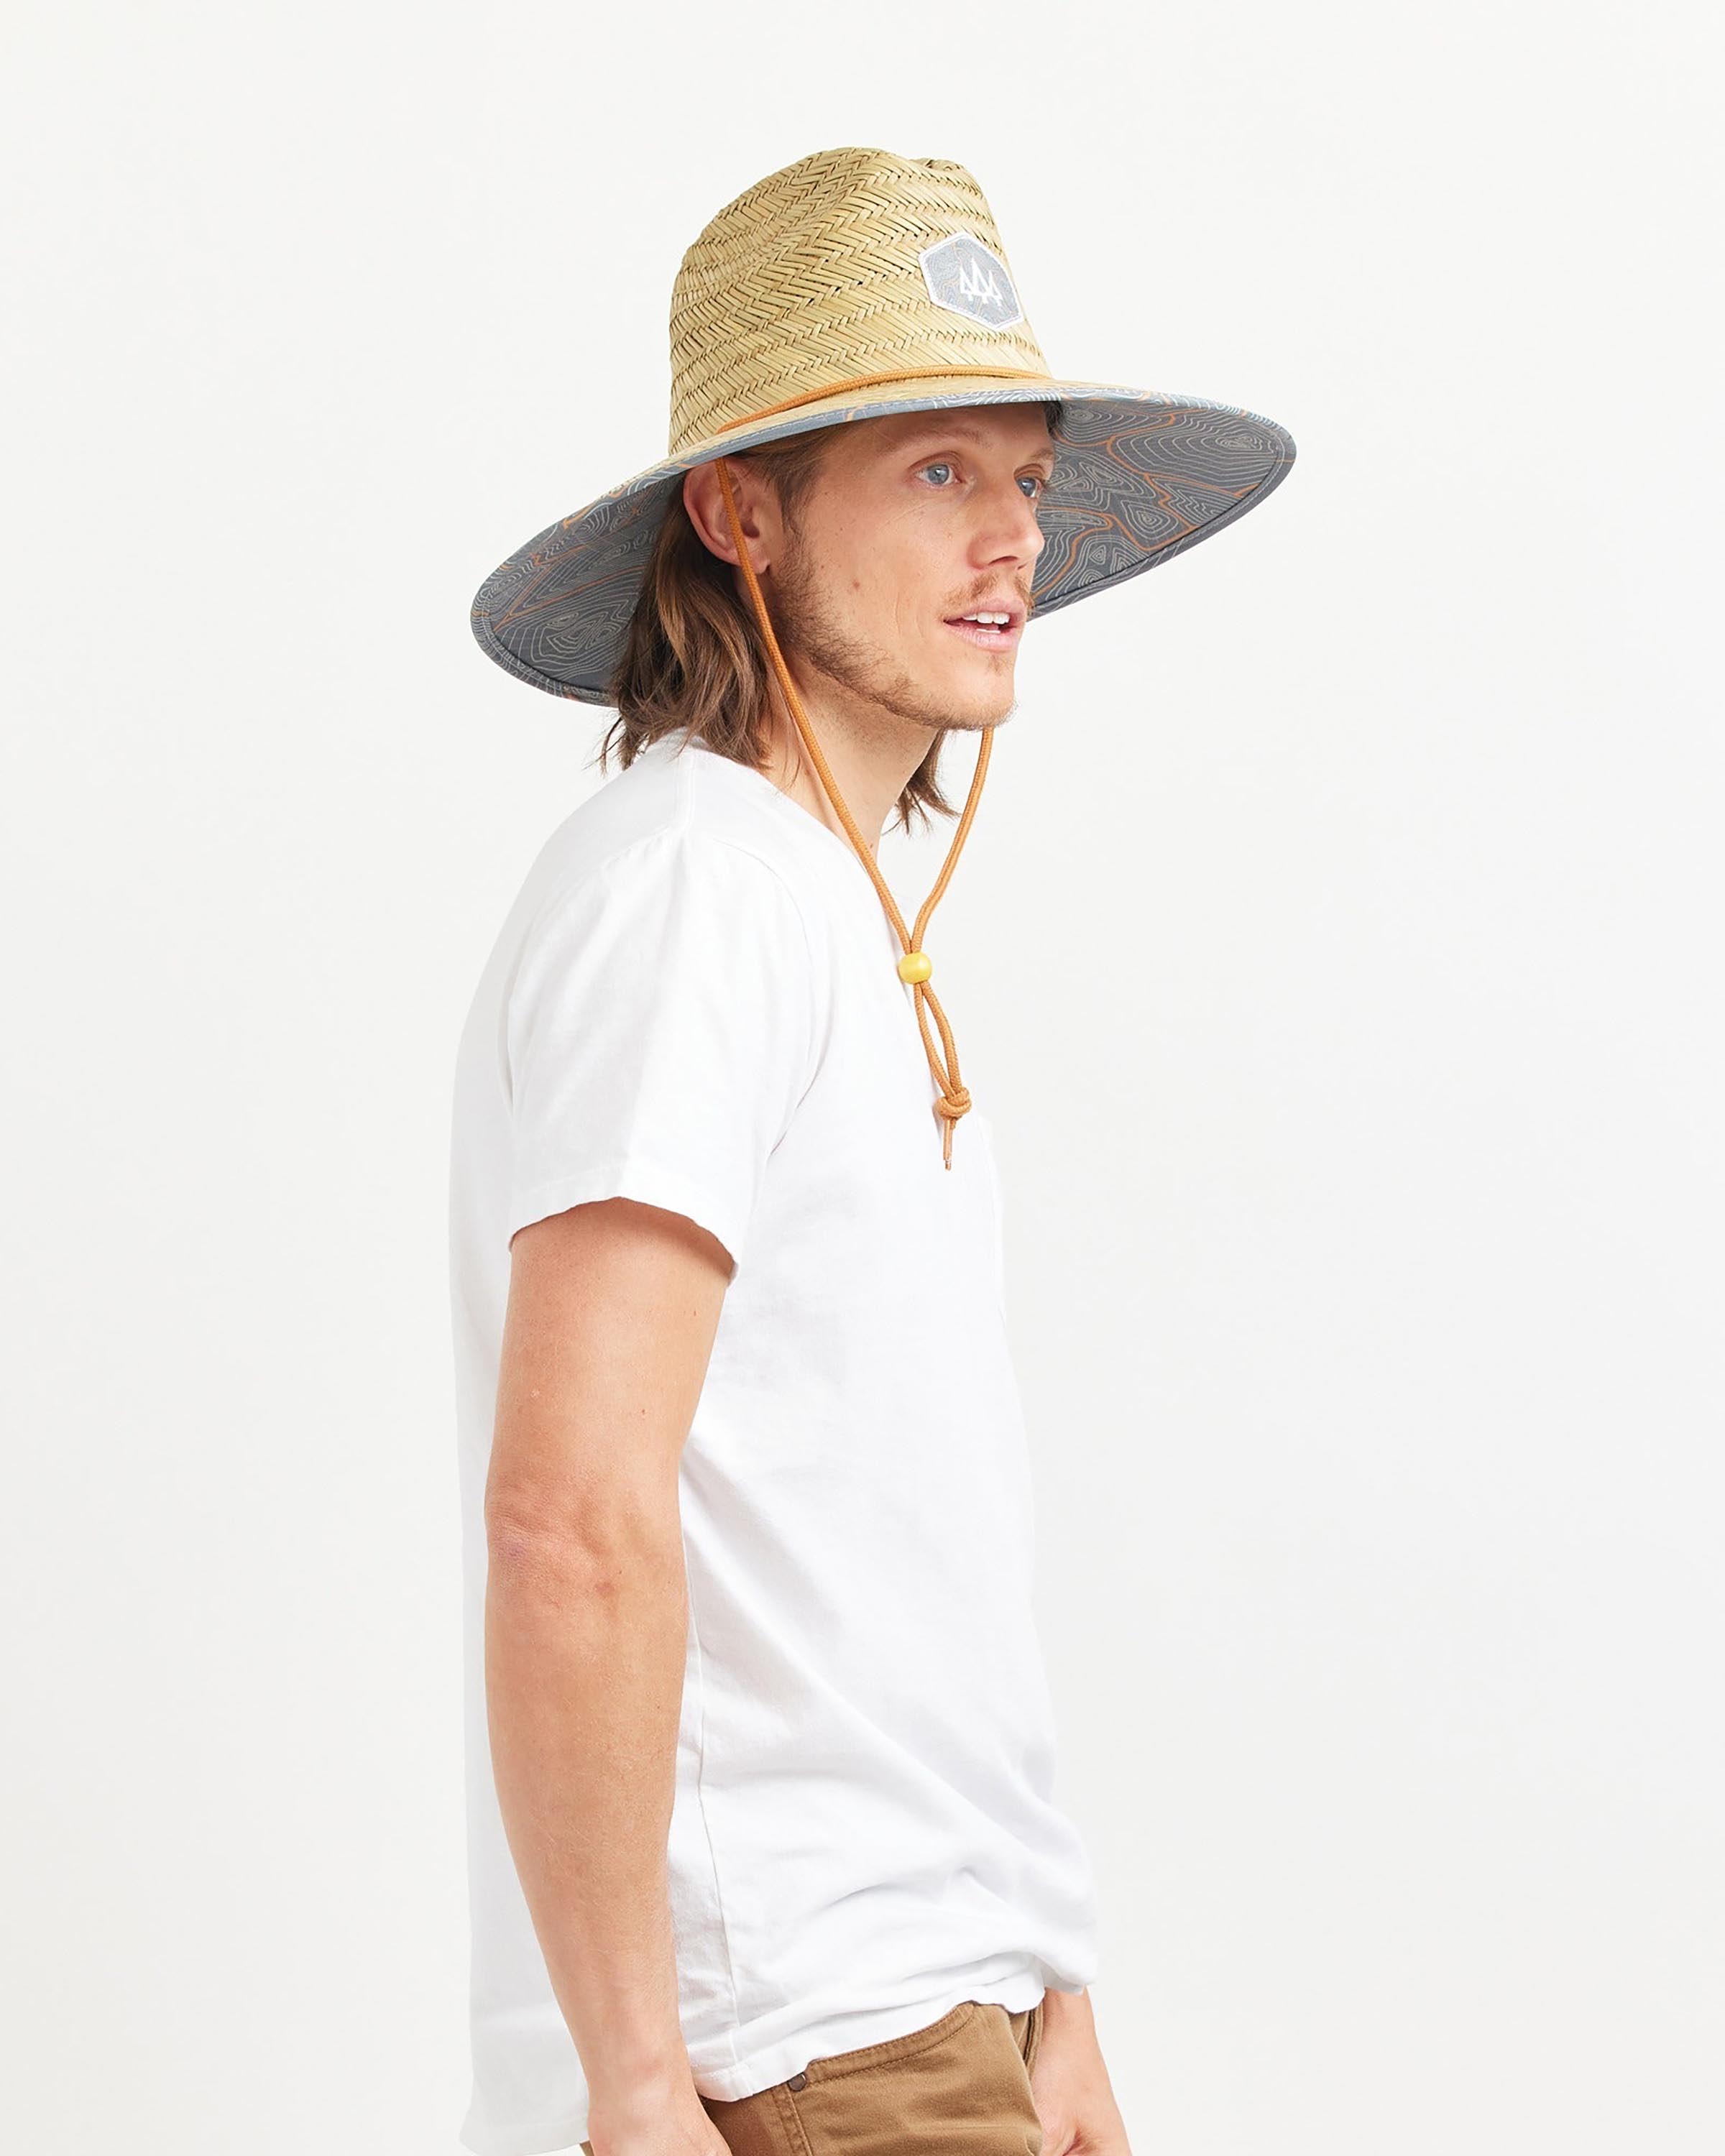 Hemlock male model looking right wearing Nomad straw lifeguard hat with topography pattern